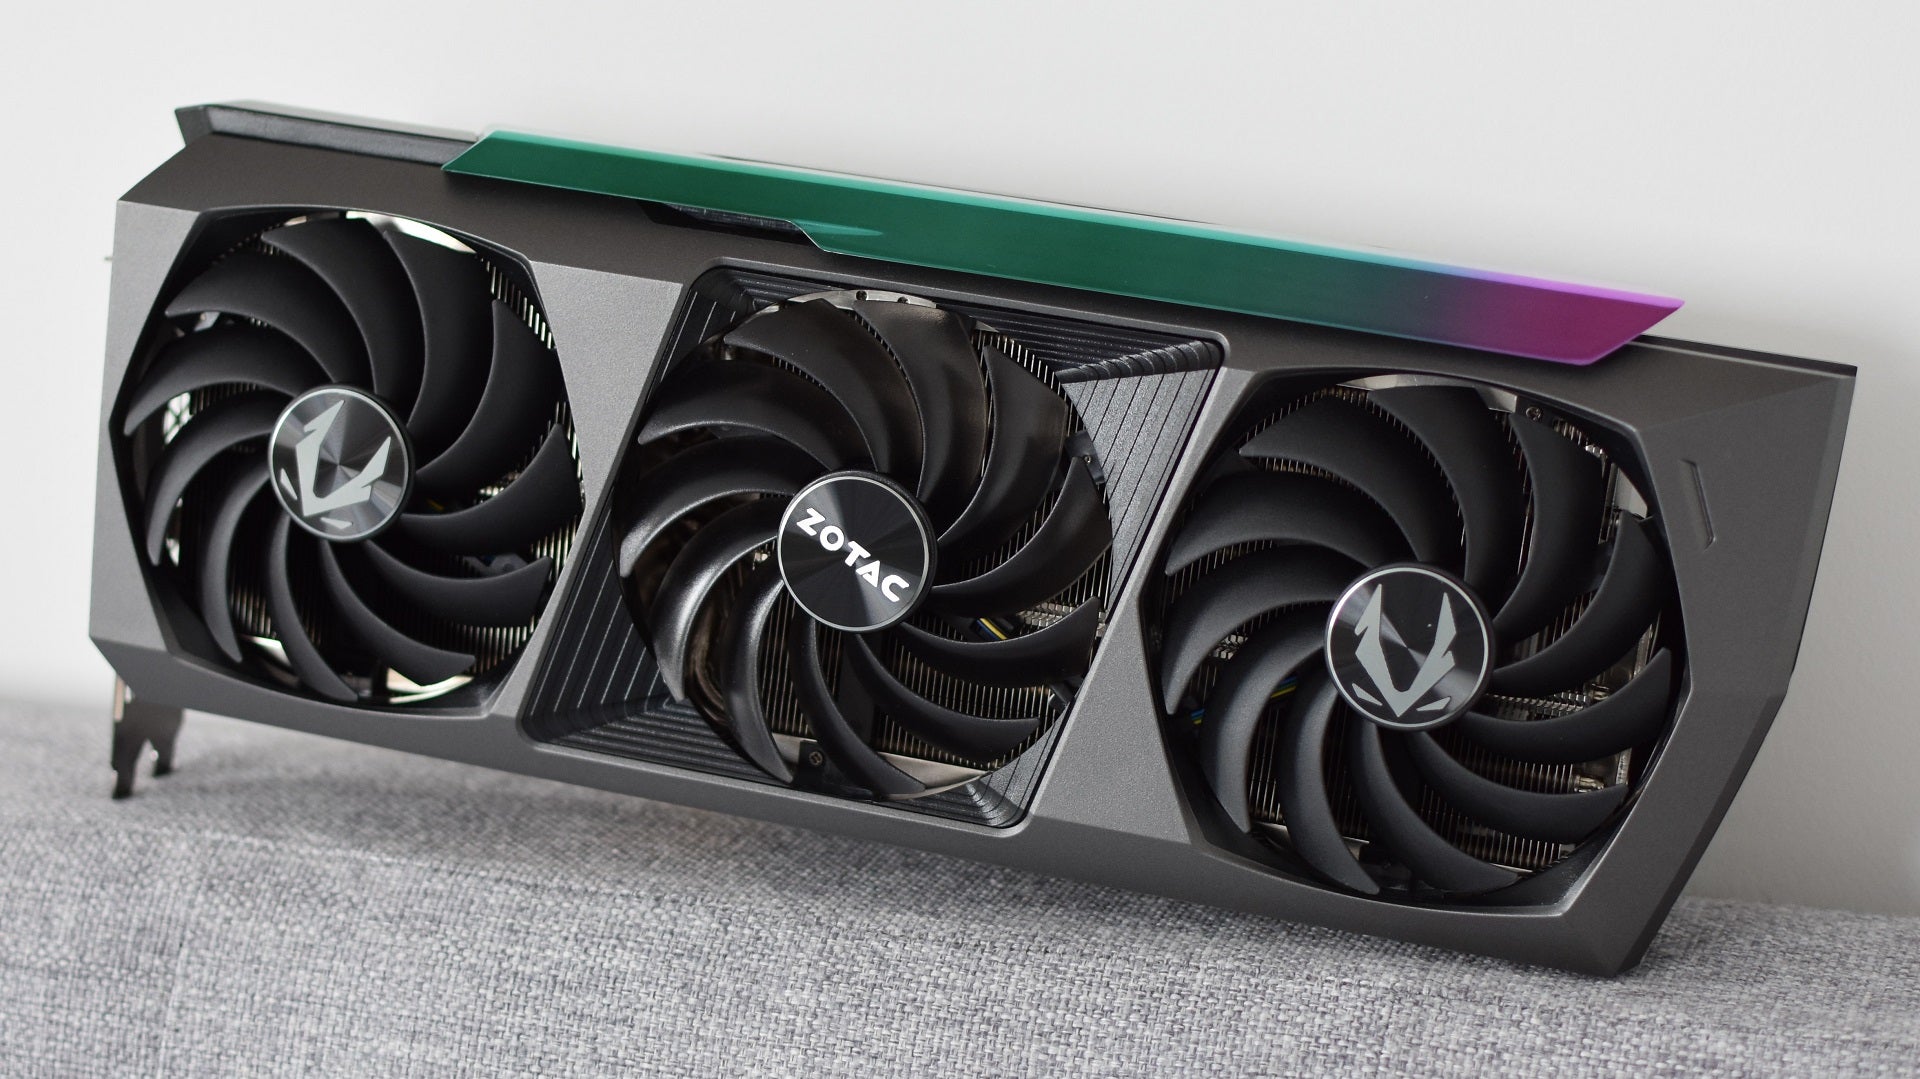 The Zotac GeForce RTX 3090 Ti AMP Extreme Holo graphics card, sitting sideways with its fans facing the camera.